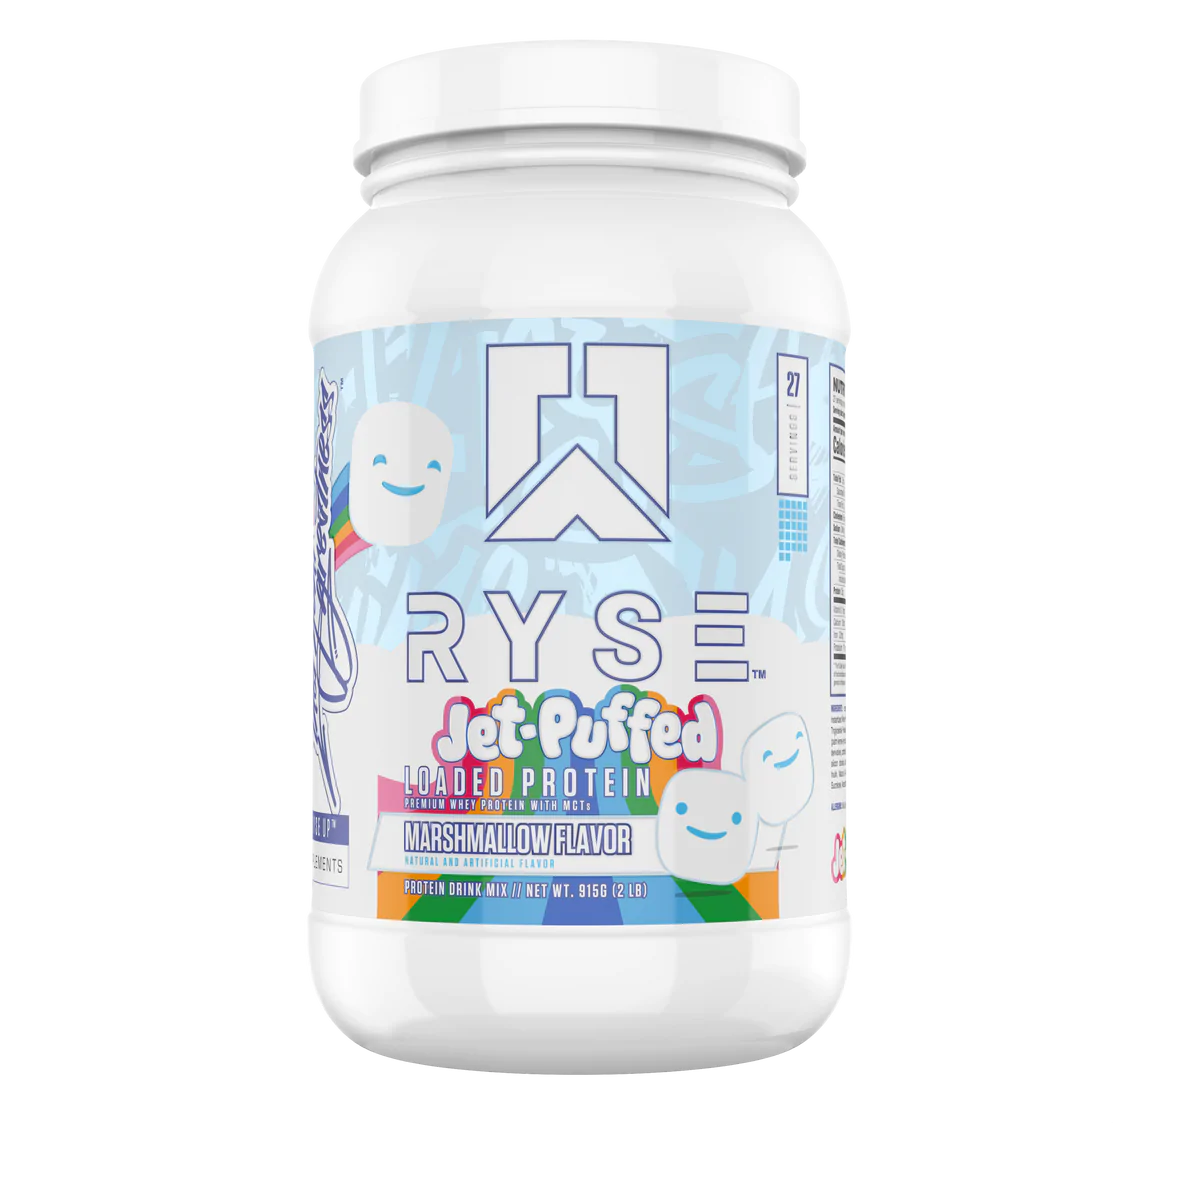 Ryse Supps Jet-Puffed Loaded Protein